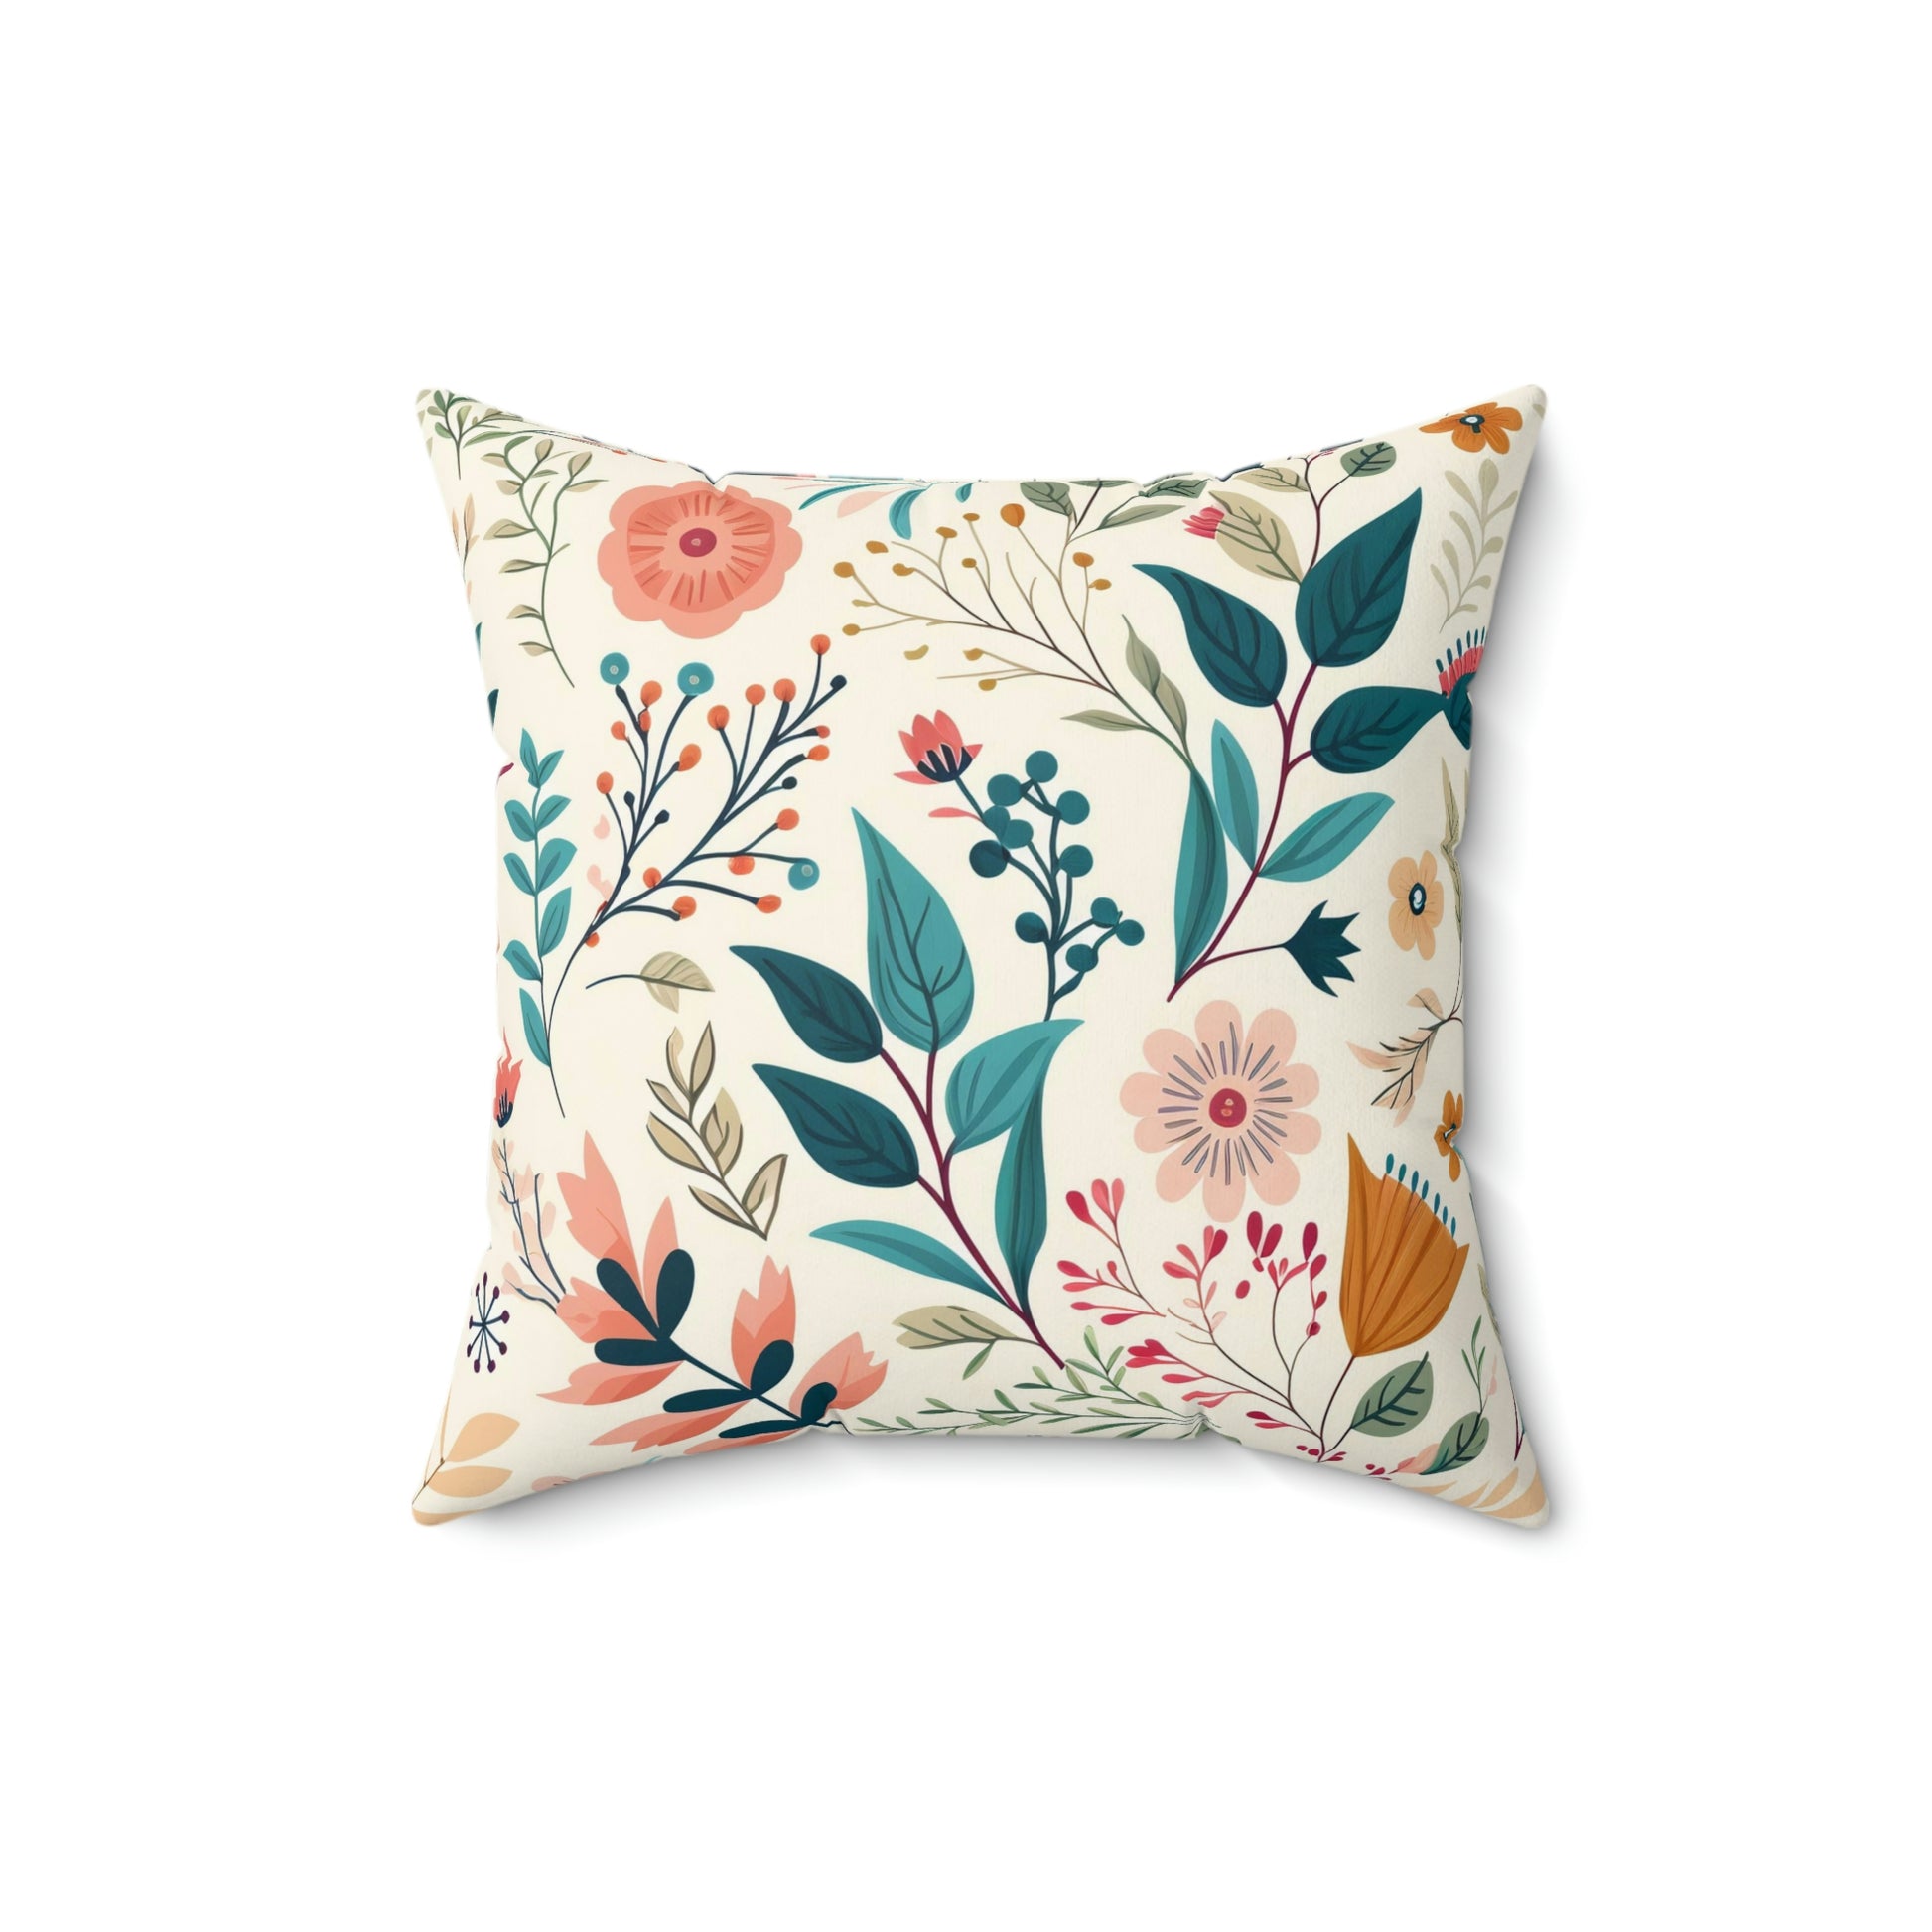 floral accent throw pillow on a couch, botanical couch pillow on a chair, floral pattern pillow on a lounger, spring garden floral decorative pillow on a bedPink and blue floral accent throw pillow on a couch, pink and blue botanical couch pillow on a chair, pink and blue floral pattern pillow on a lounger, pink and blue spring garden floral decorative pillow on a bed